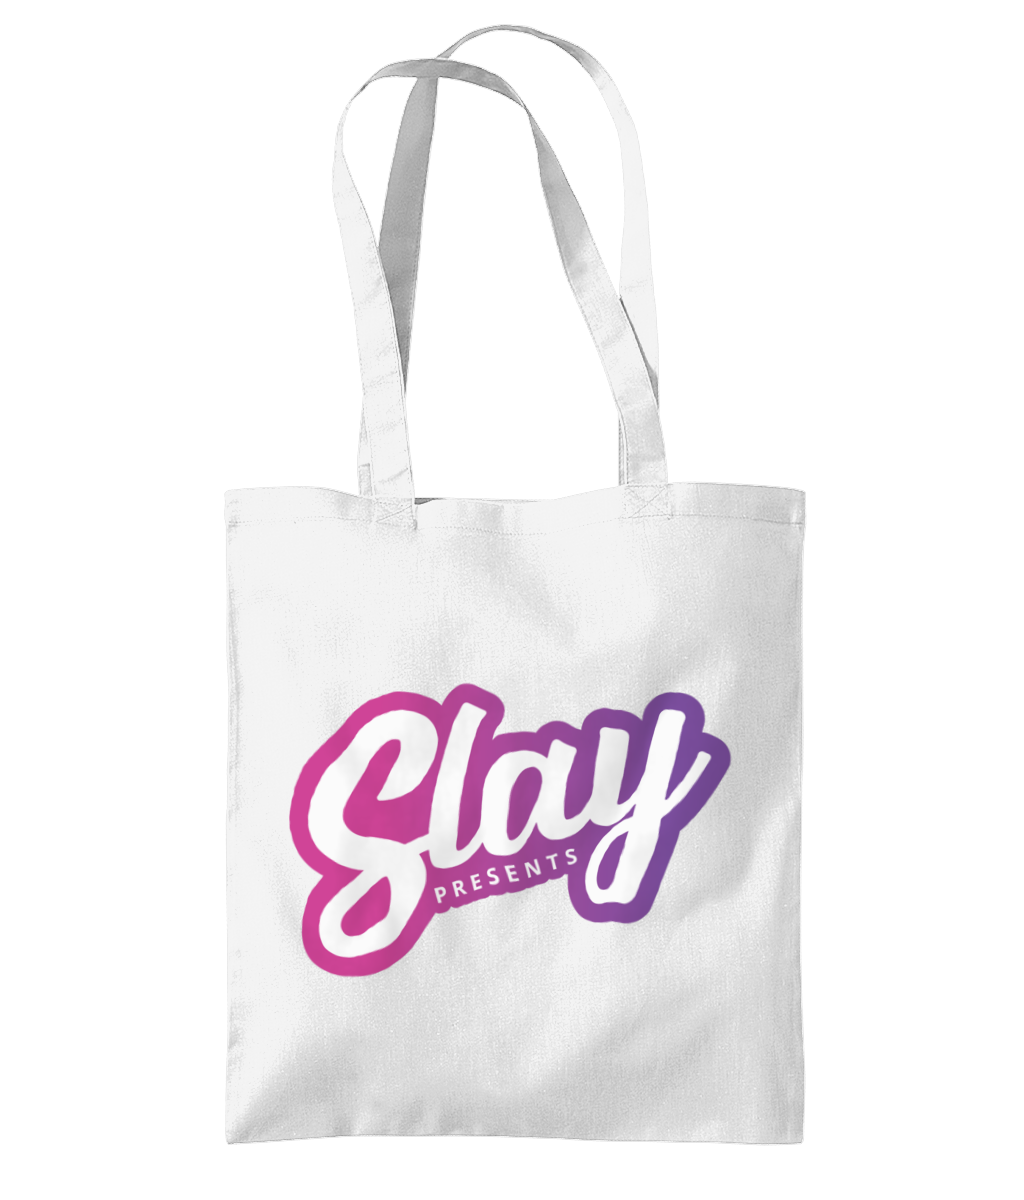 Slay! Presents Tote Bag - SNATCHED MERCH